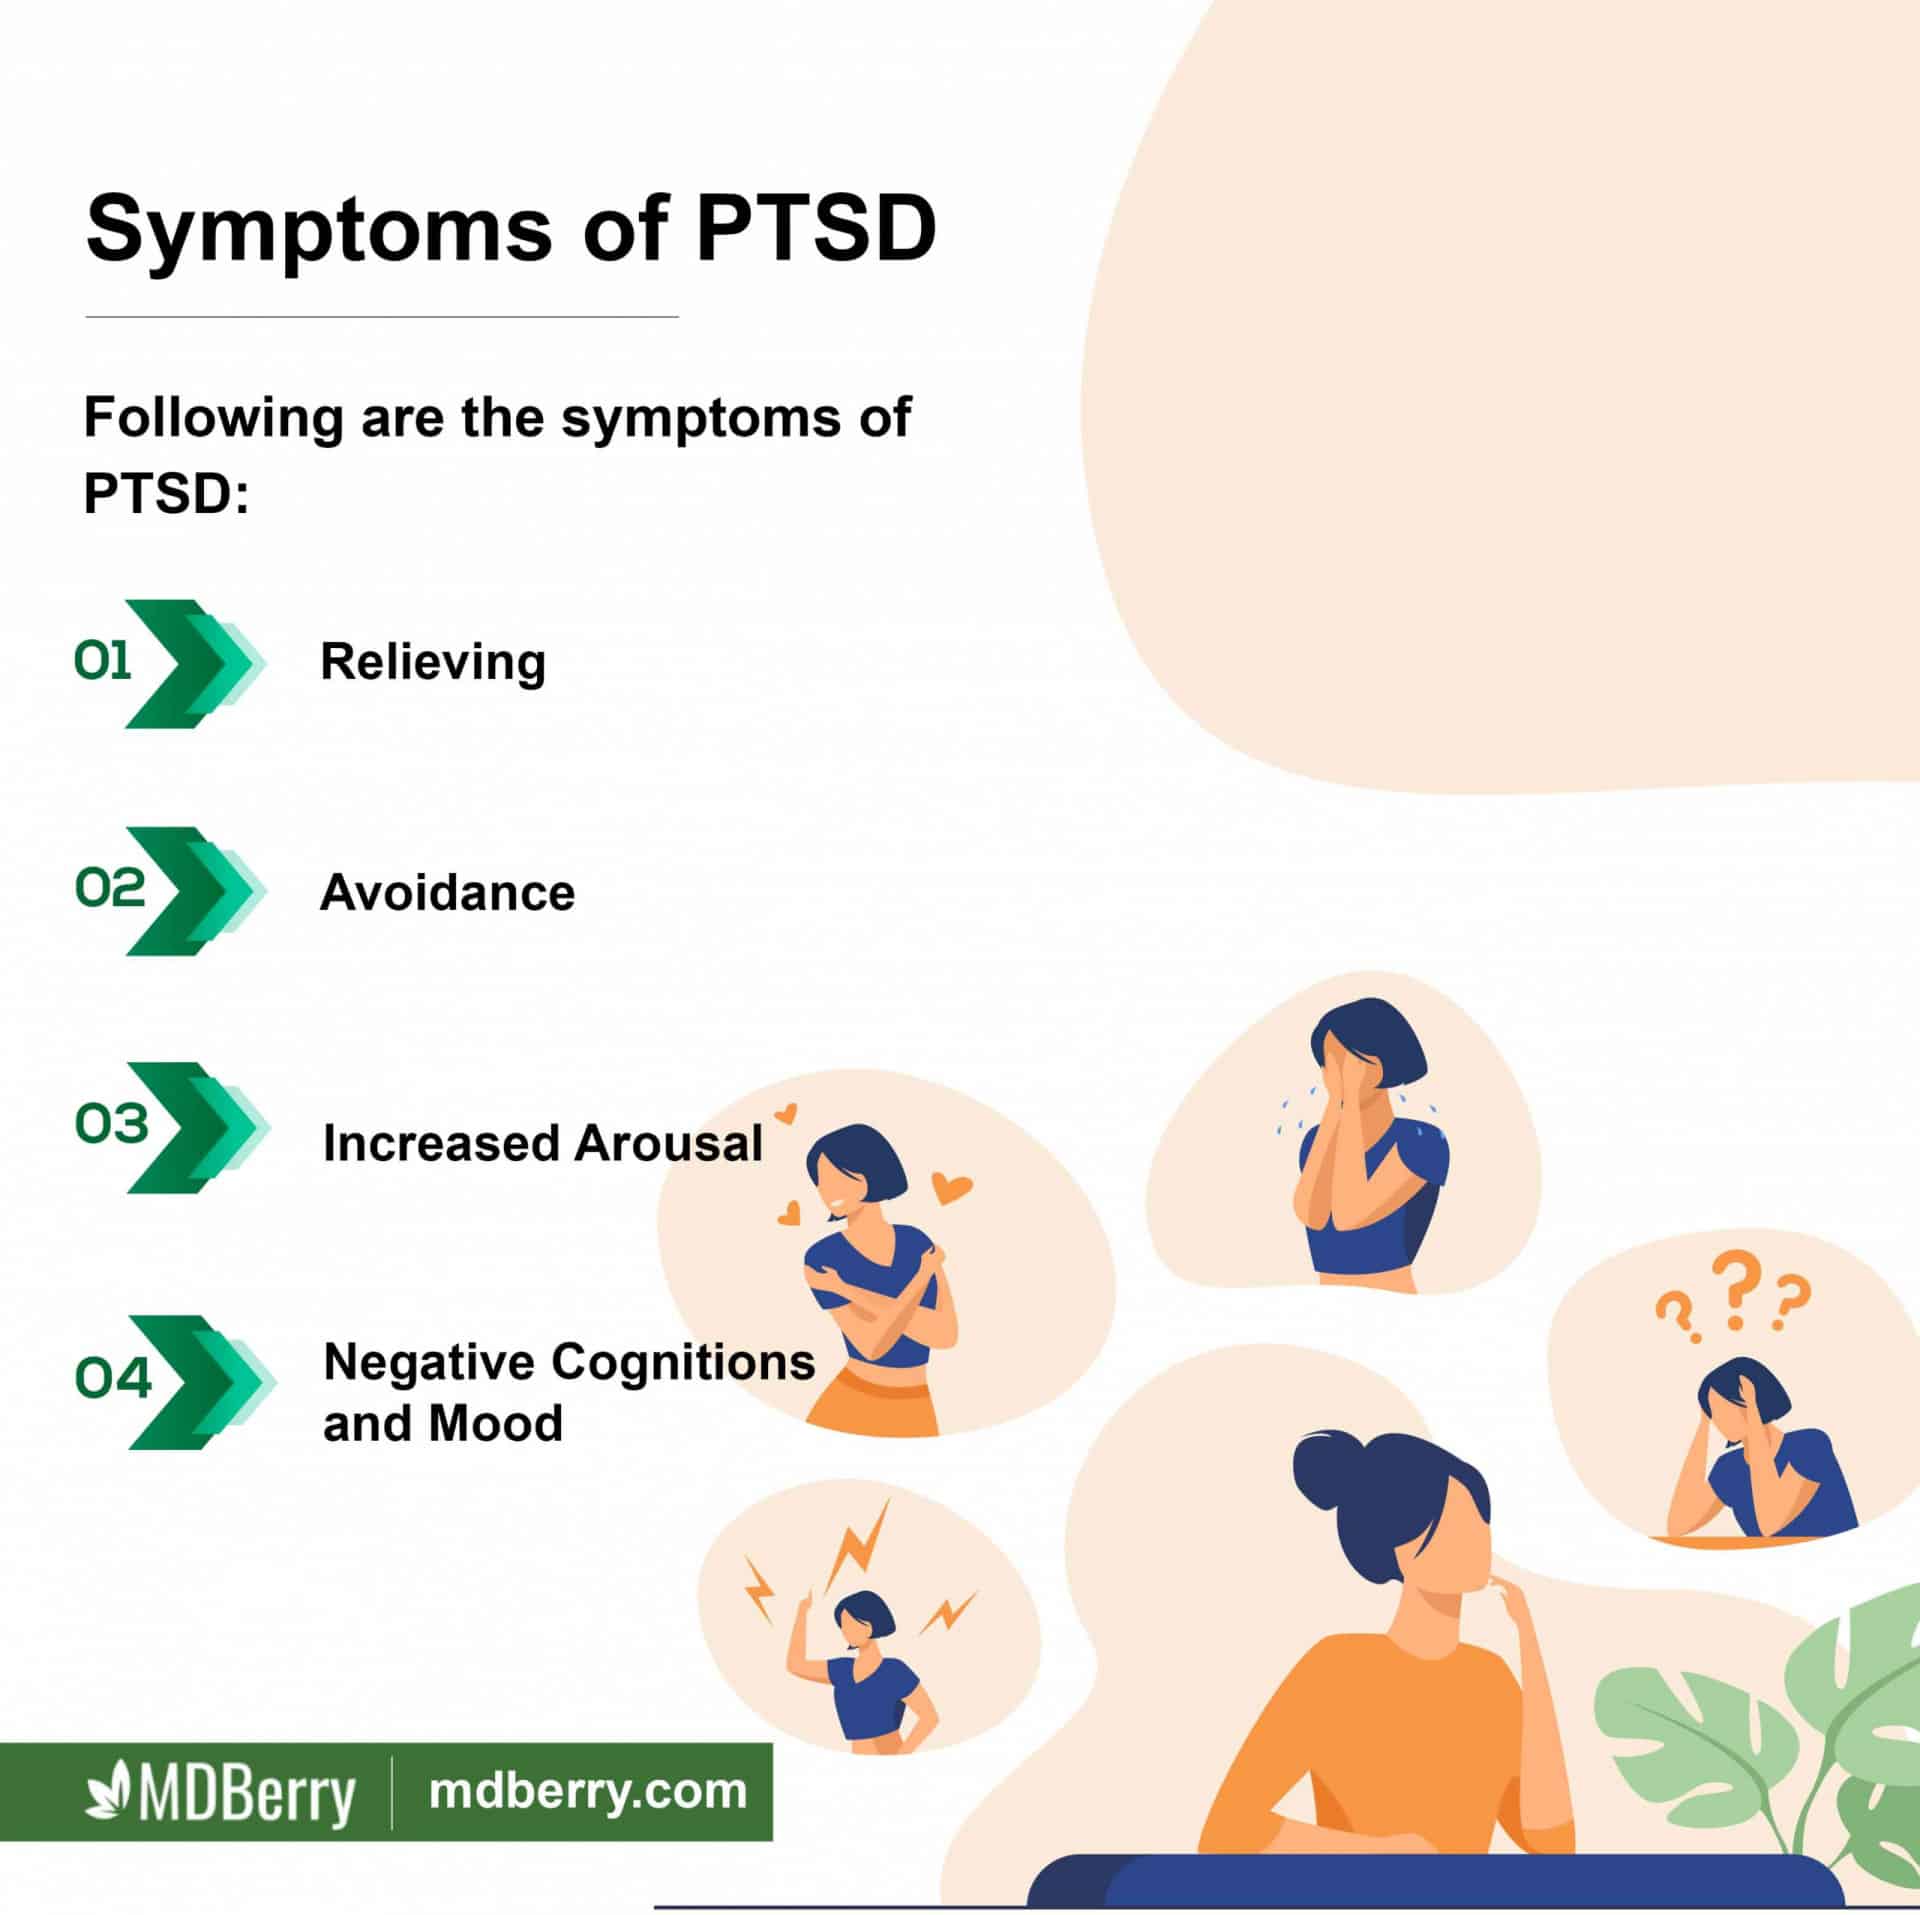 Is PTSD an Approved Condition for MMJ treatment?